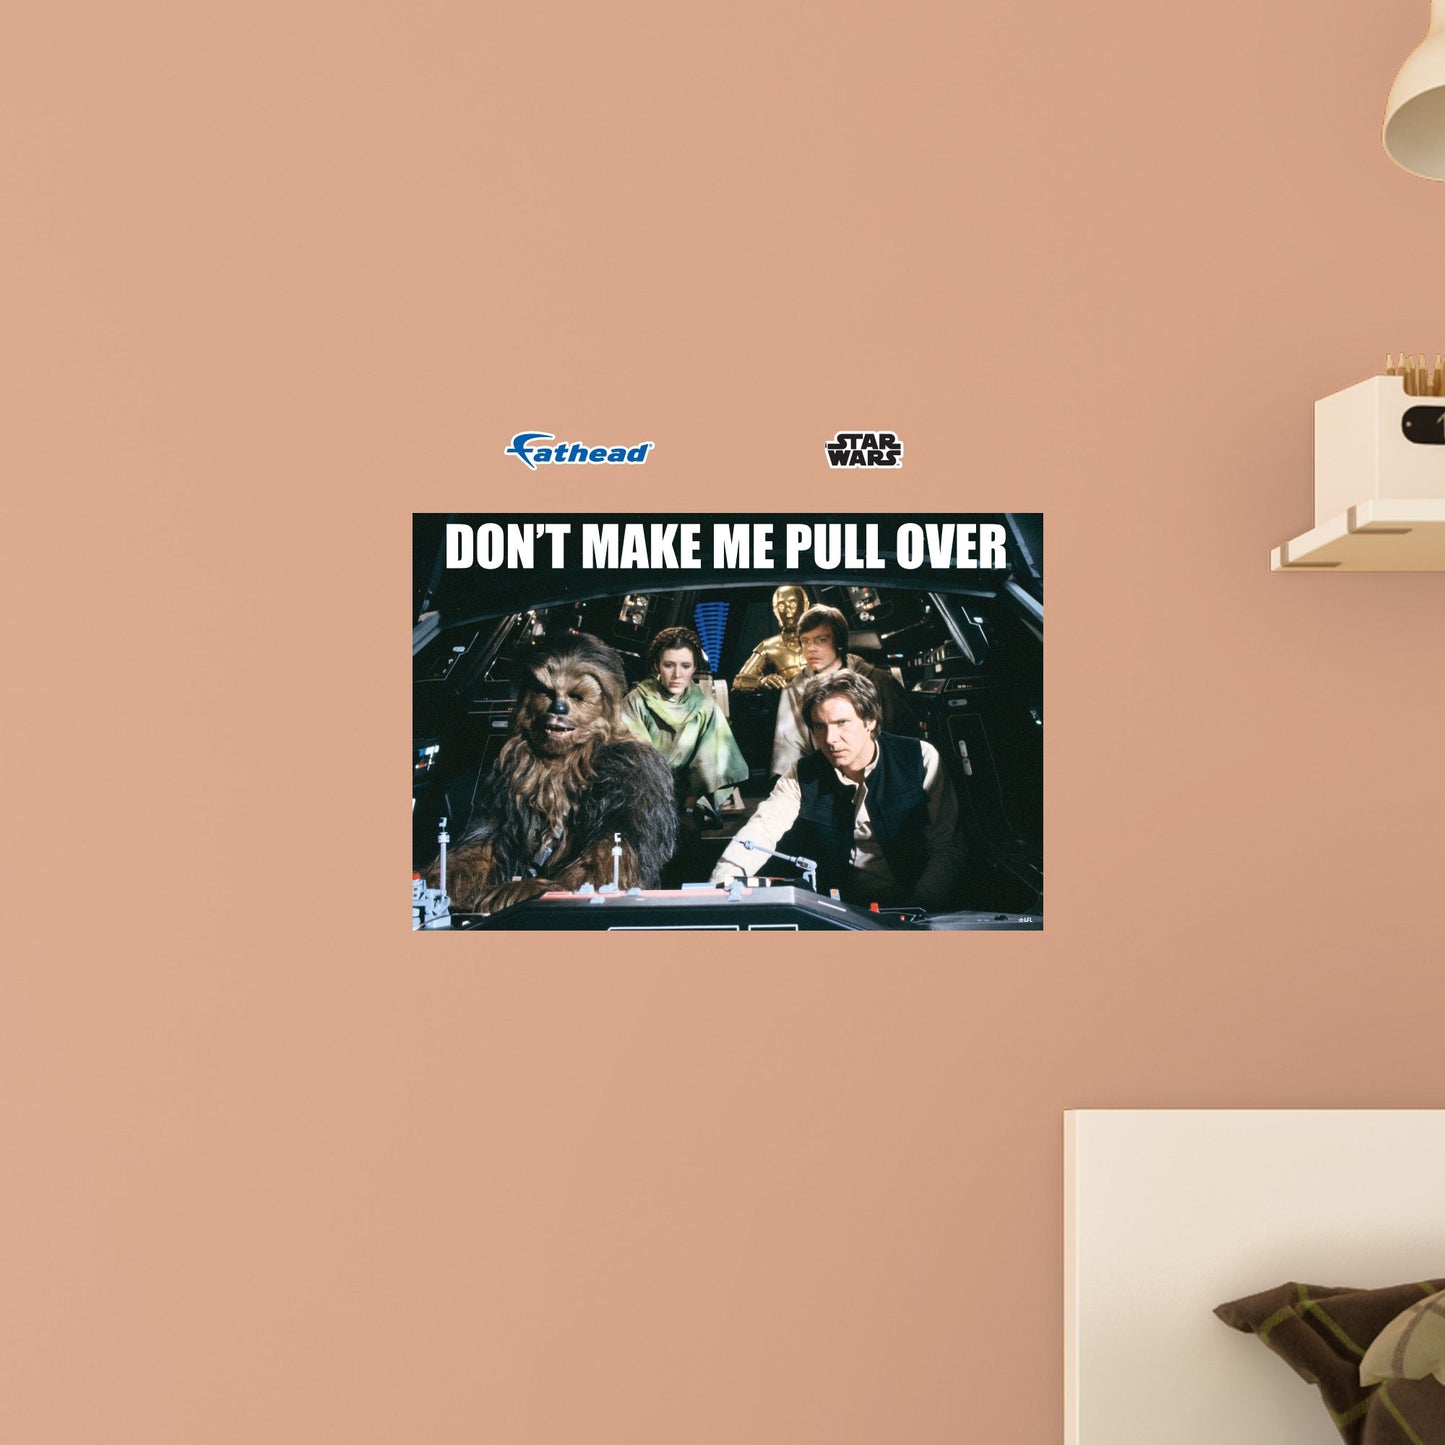 Don't Make Me Pull Over meme Poster        - Officially Licensed Star Wars Removable     Adhesive Decal